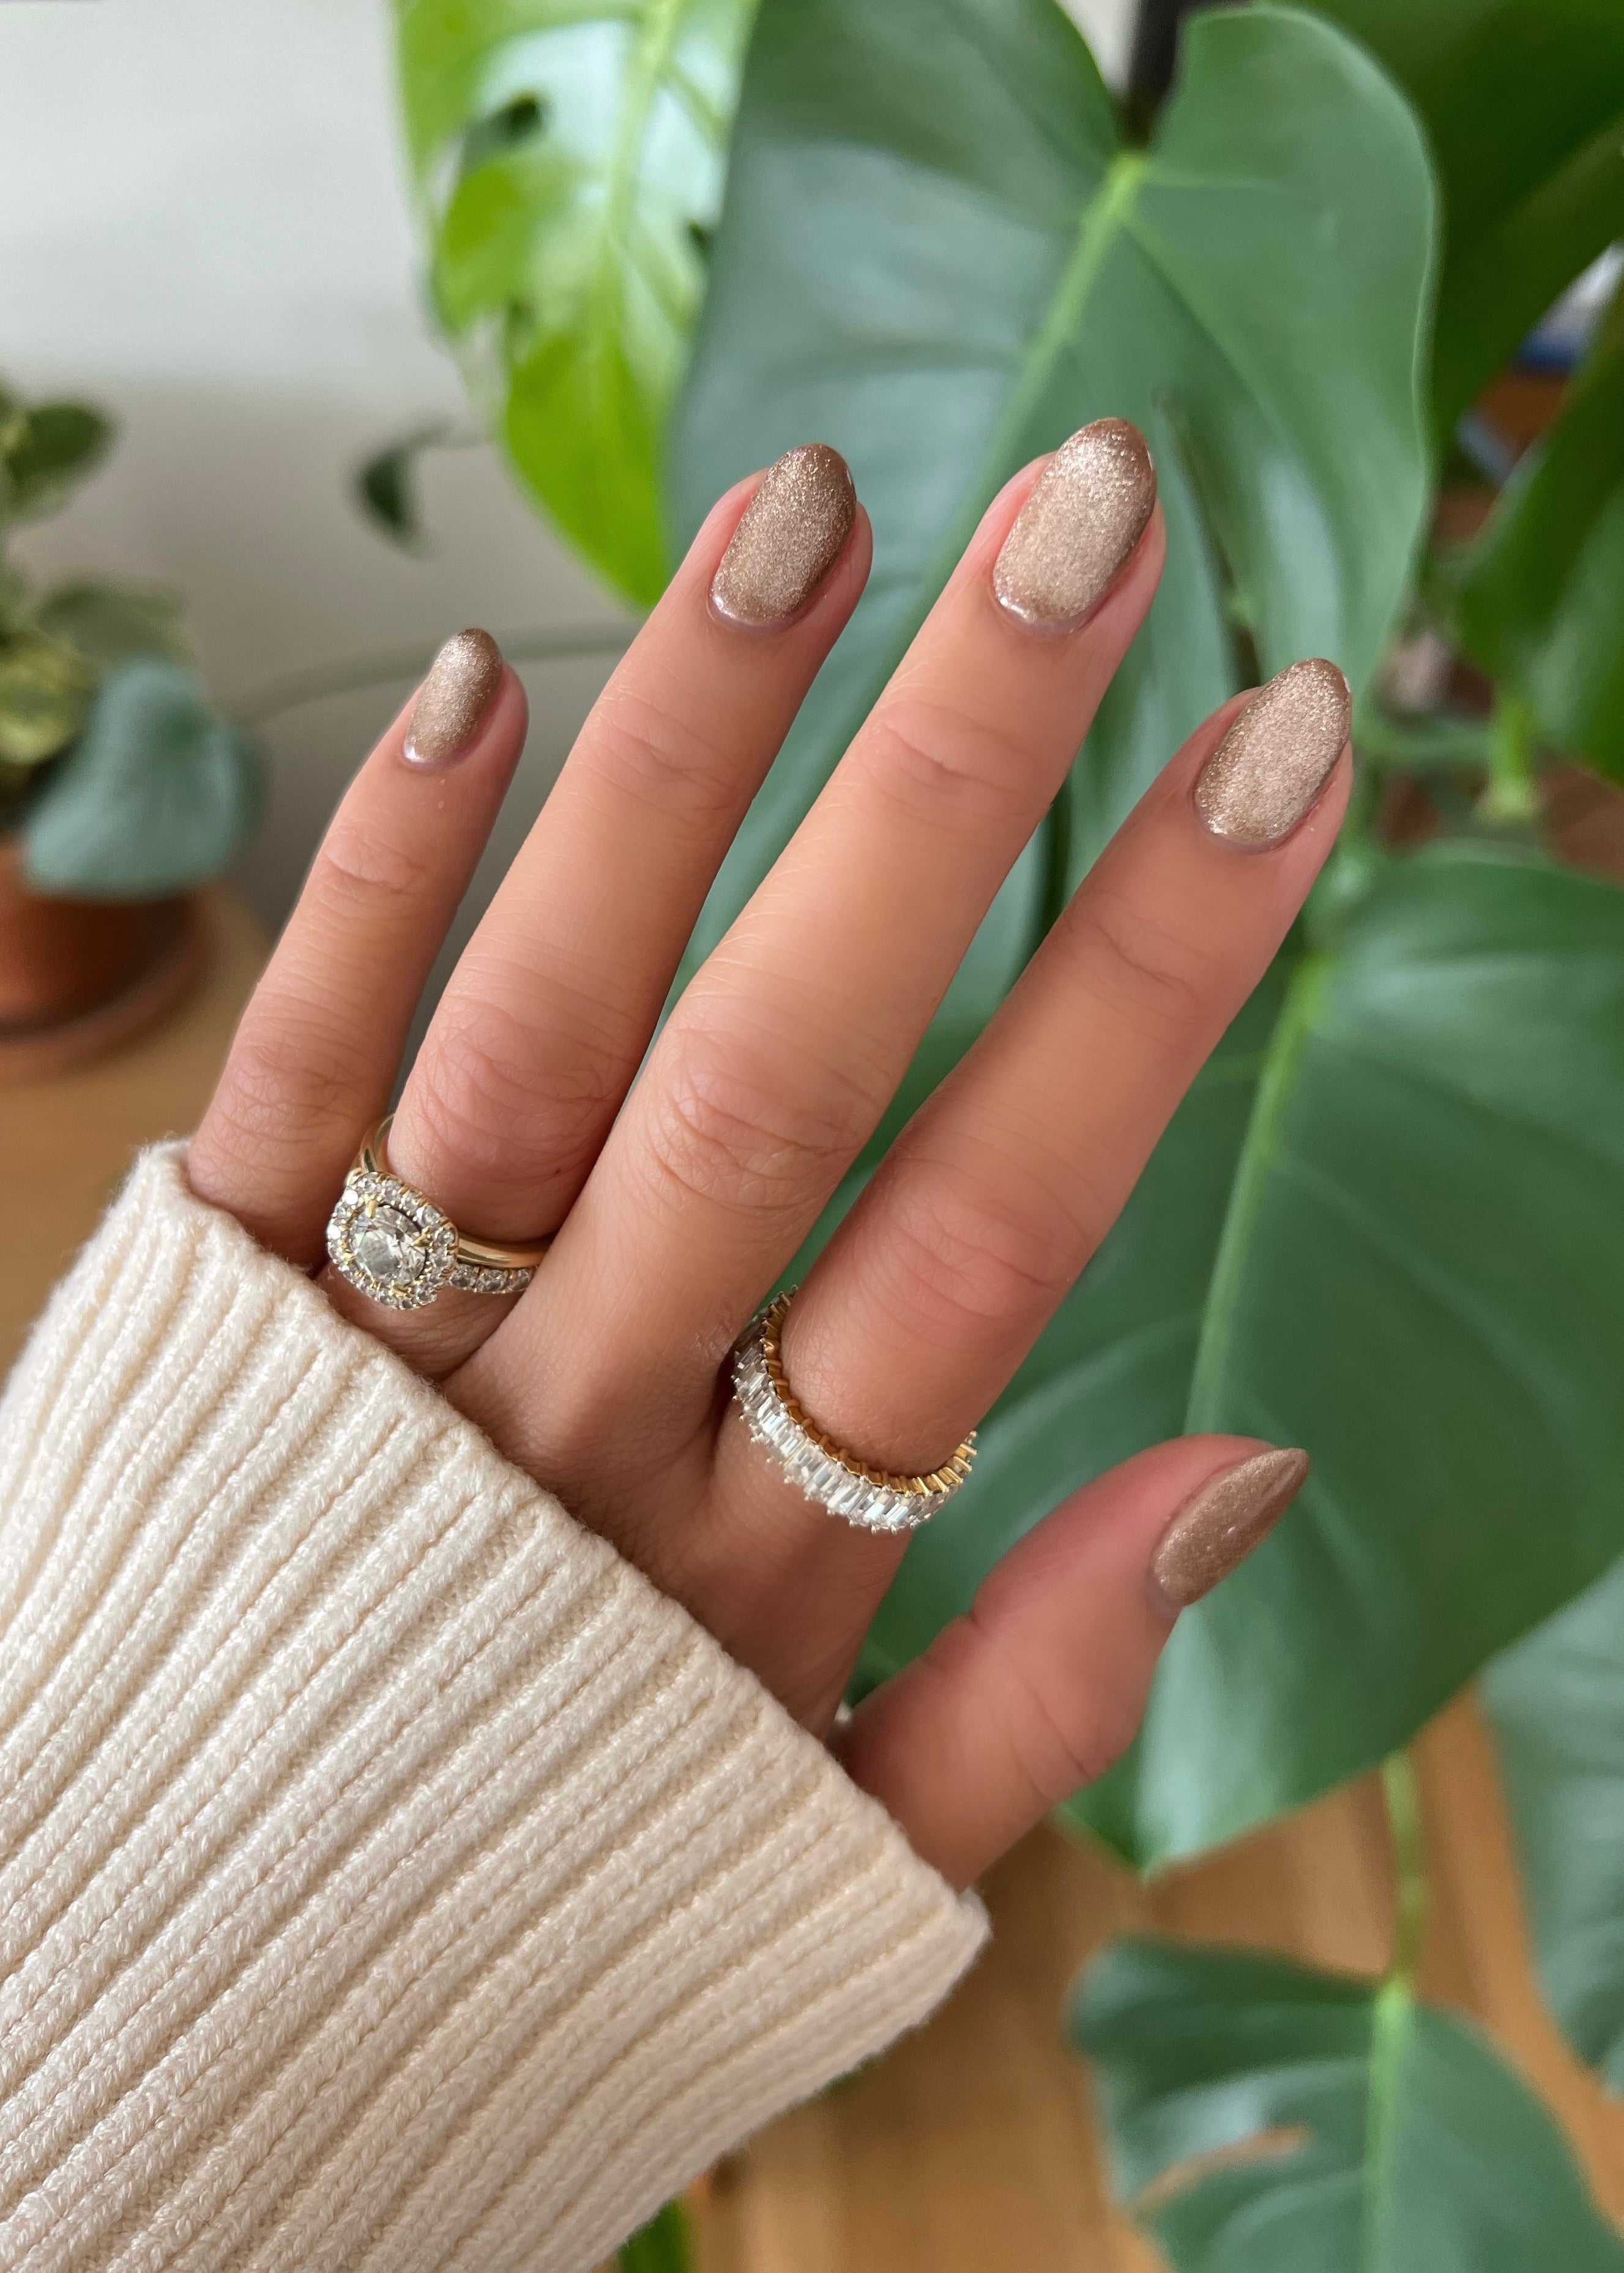 This Magnetic Polish Gives You Velvet Nails at Home—and I Tried It